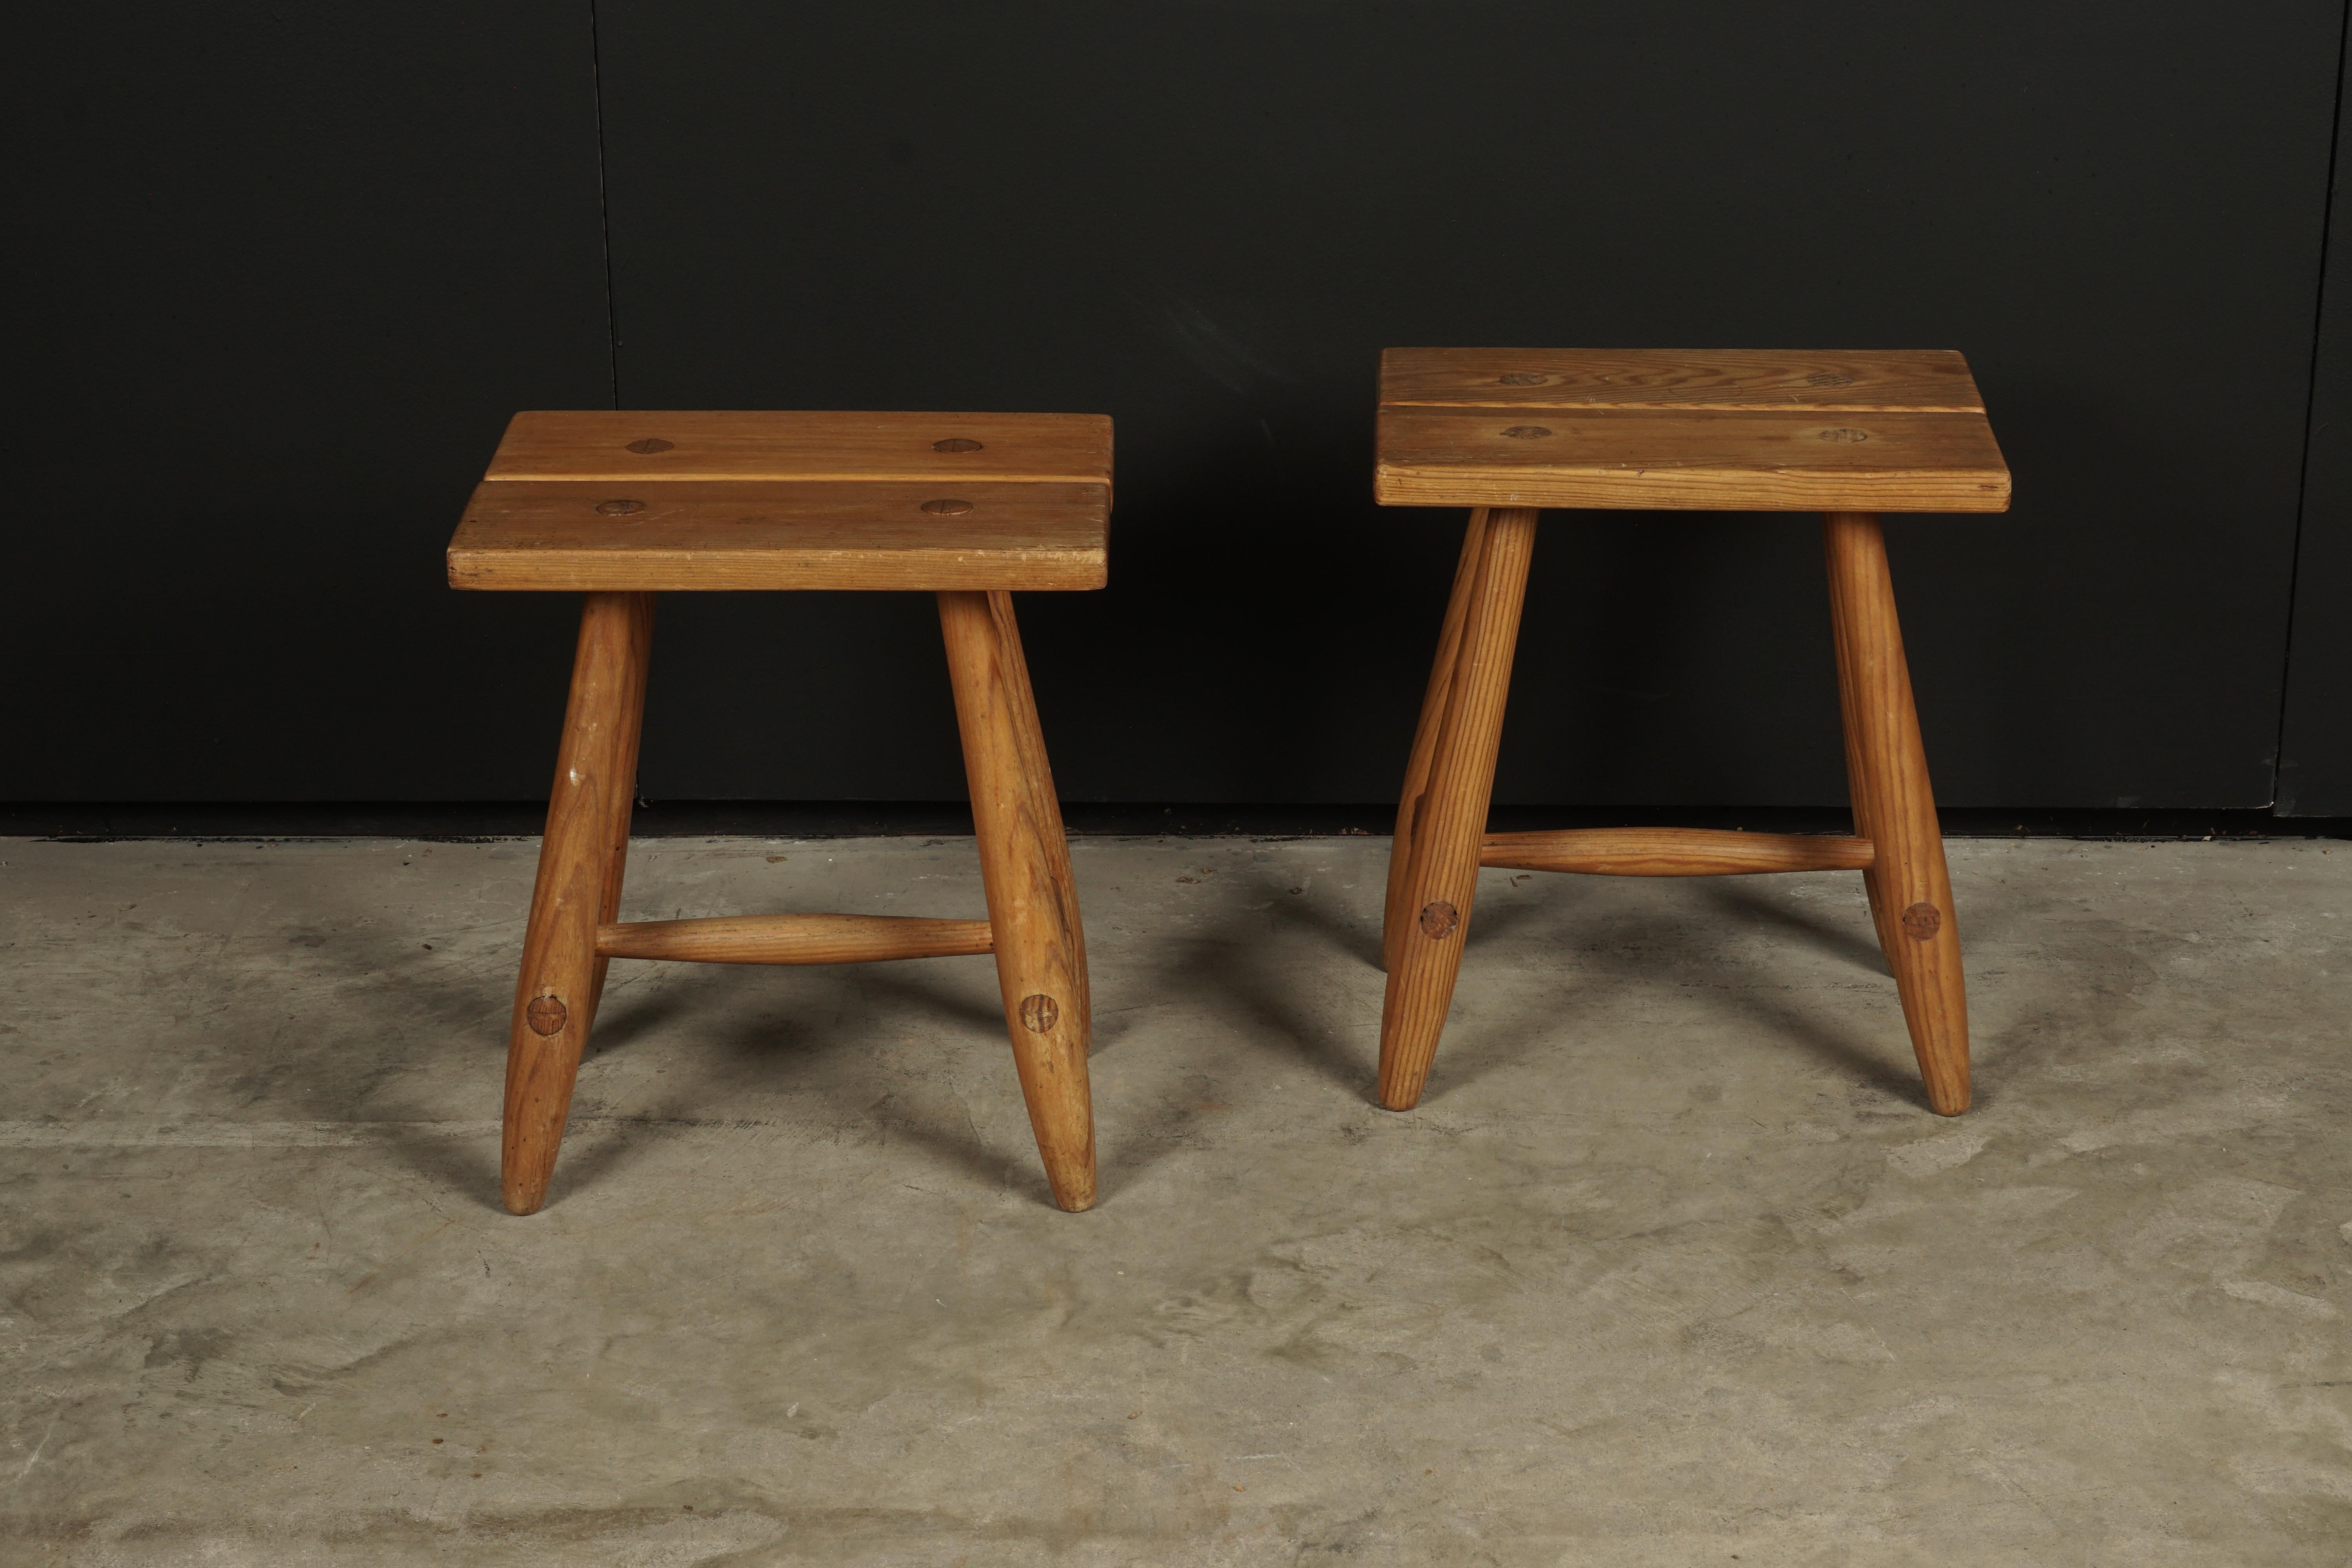 Pair of midcentury stools from Sweden, circa 1960. Light wear and patina. Solid pine construction.